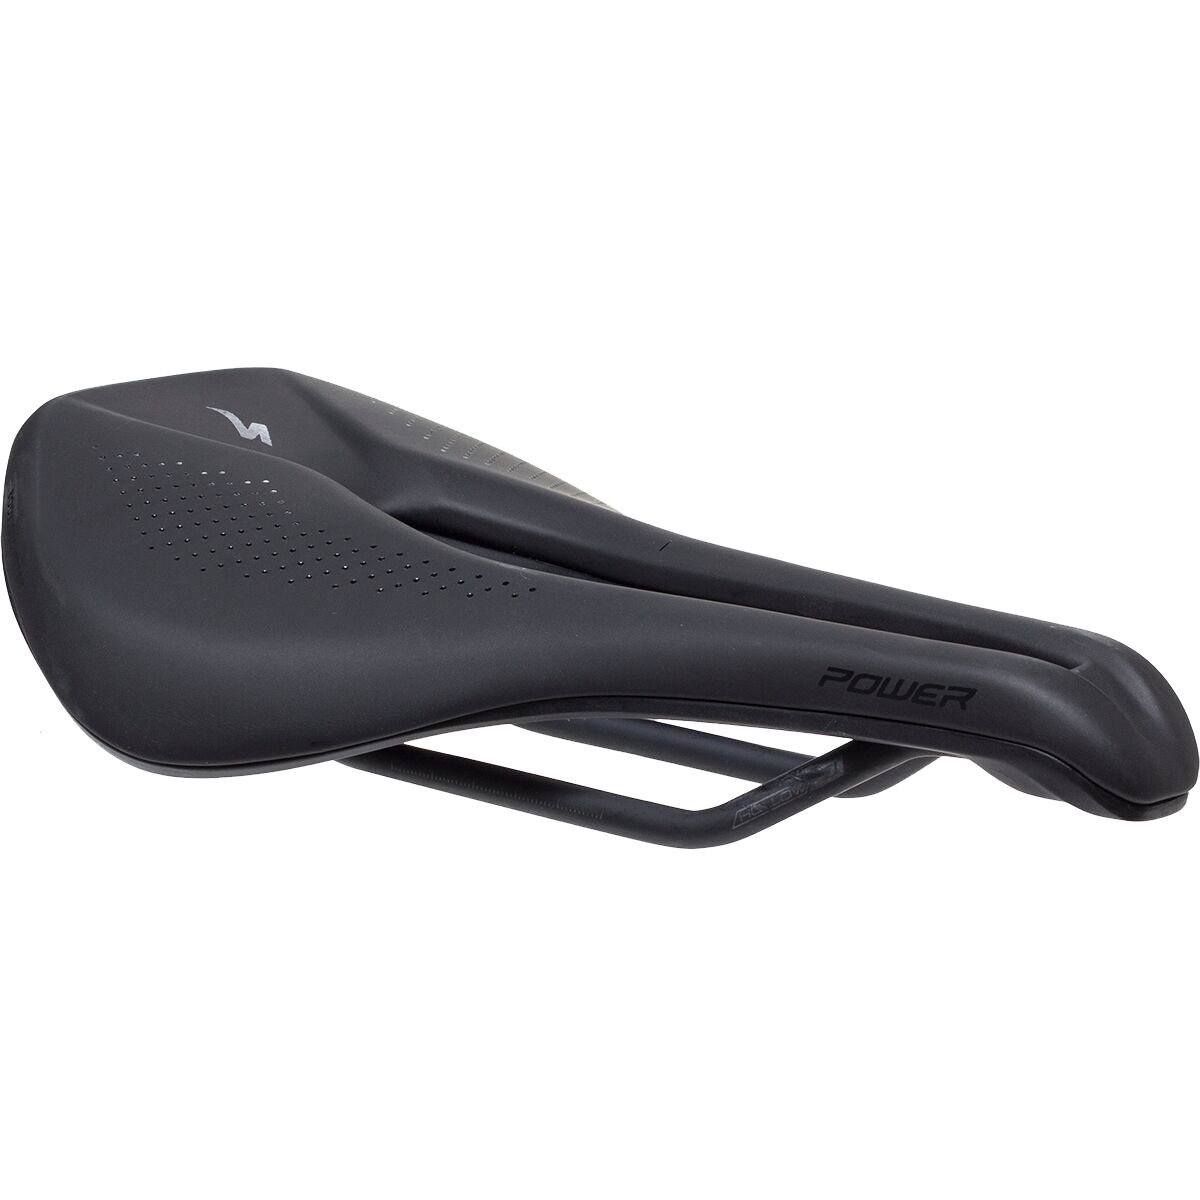 Specialized Power Expert Saddle - Components